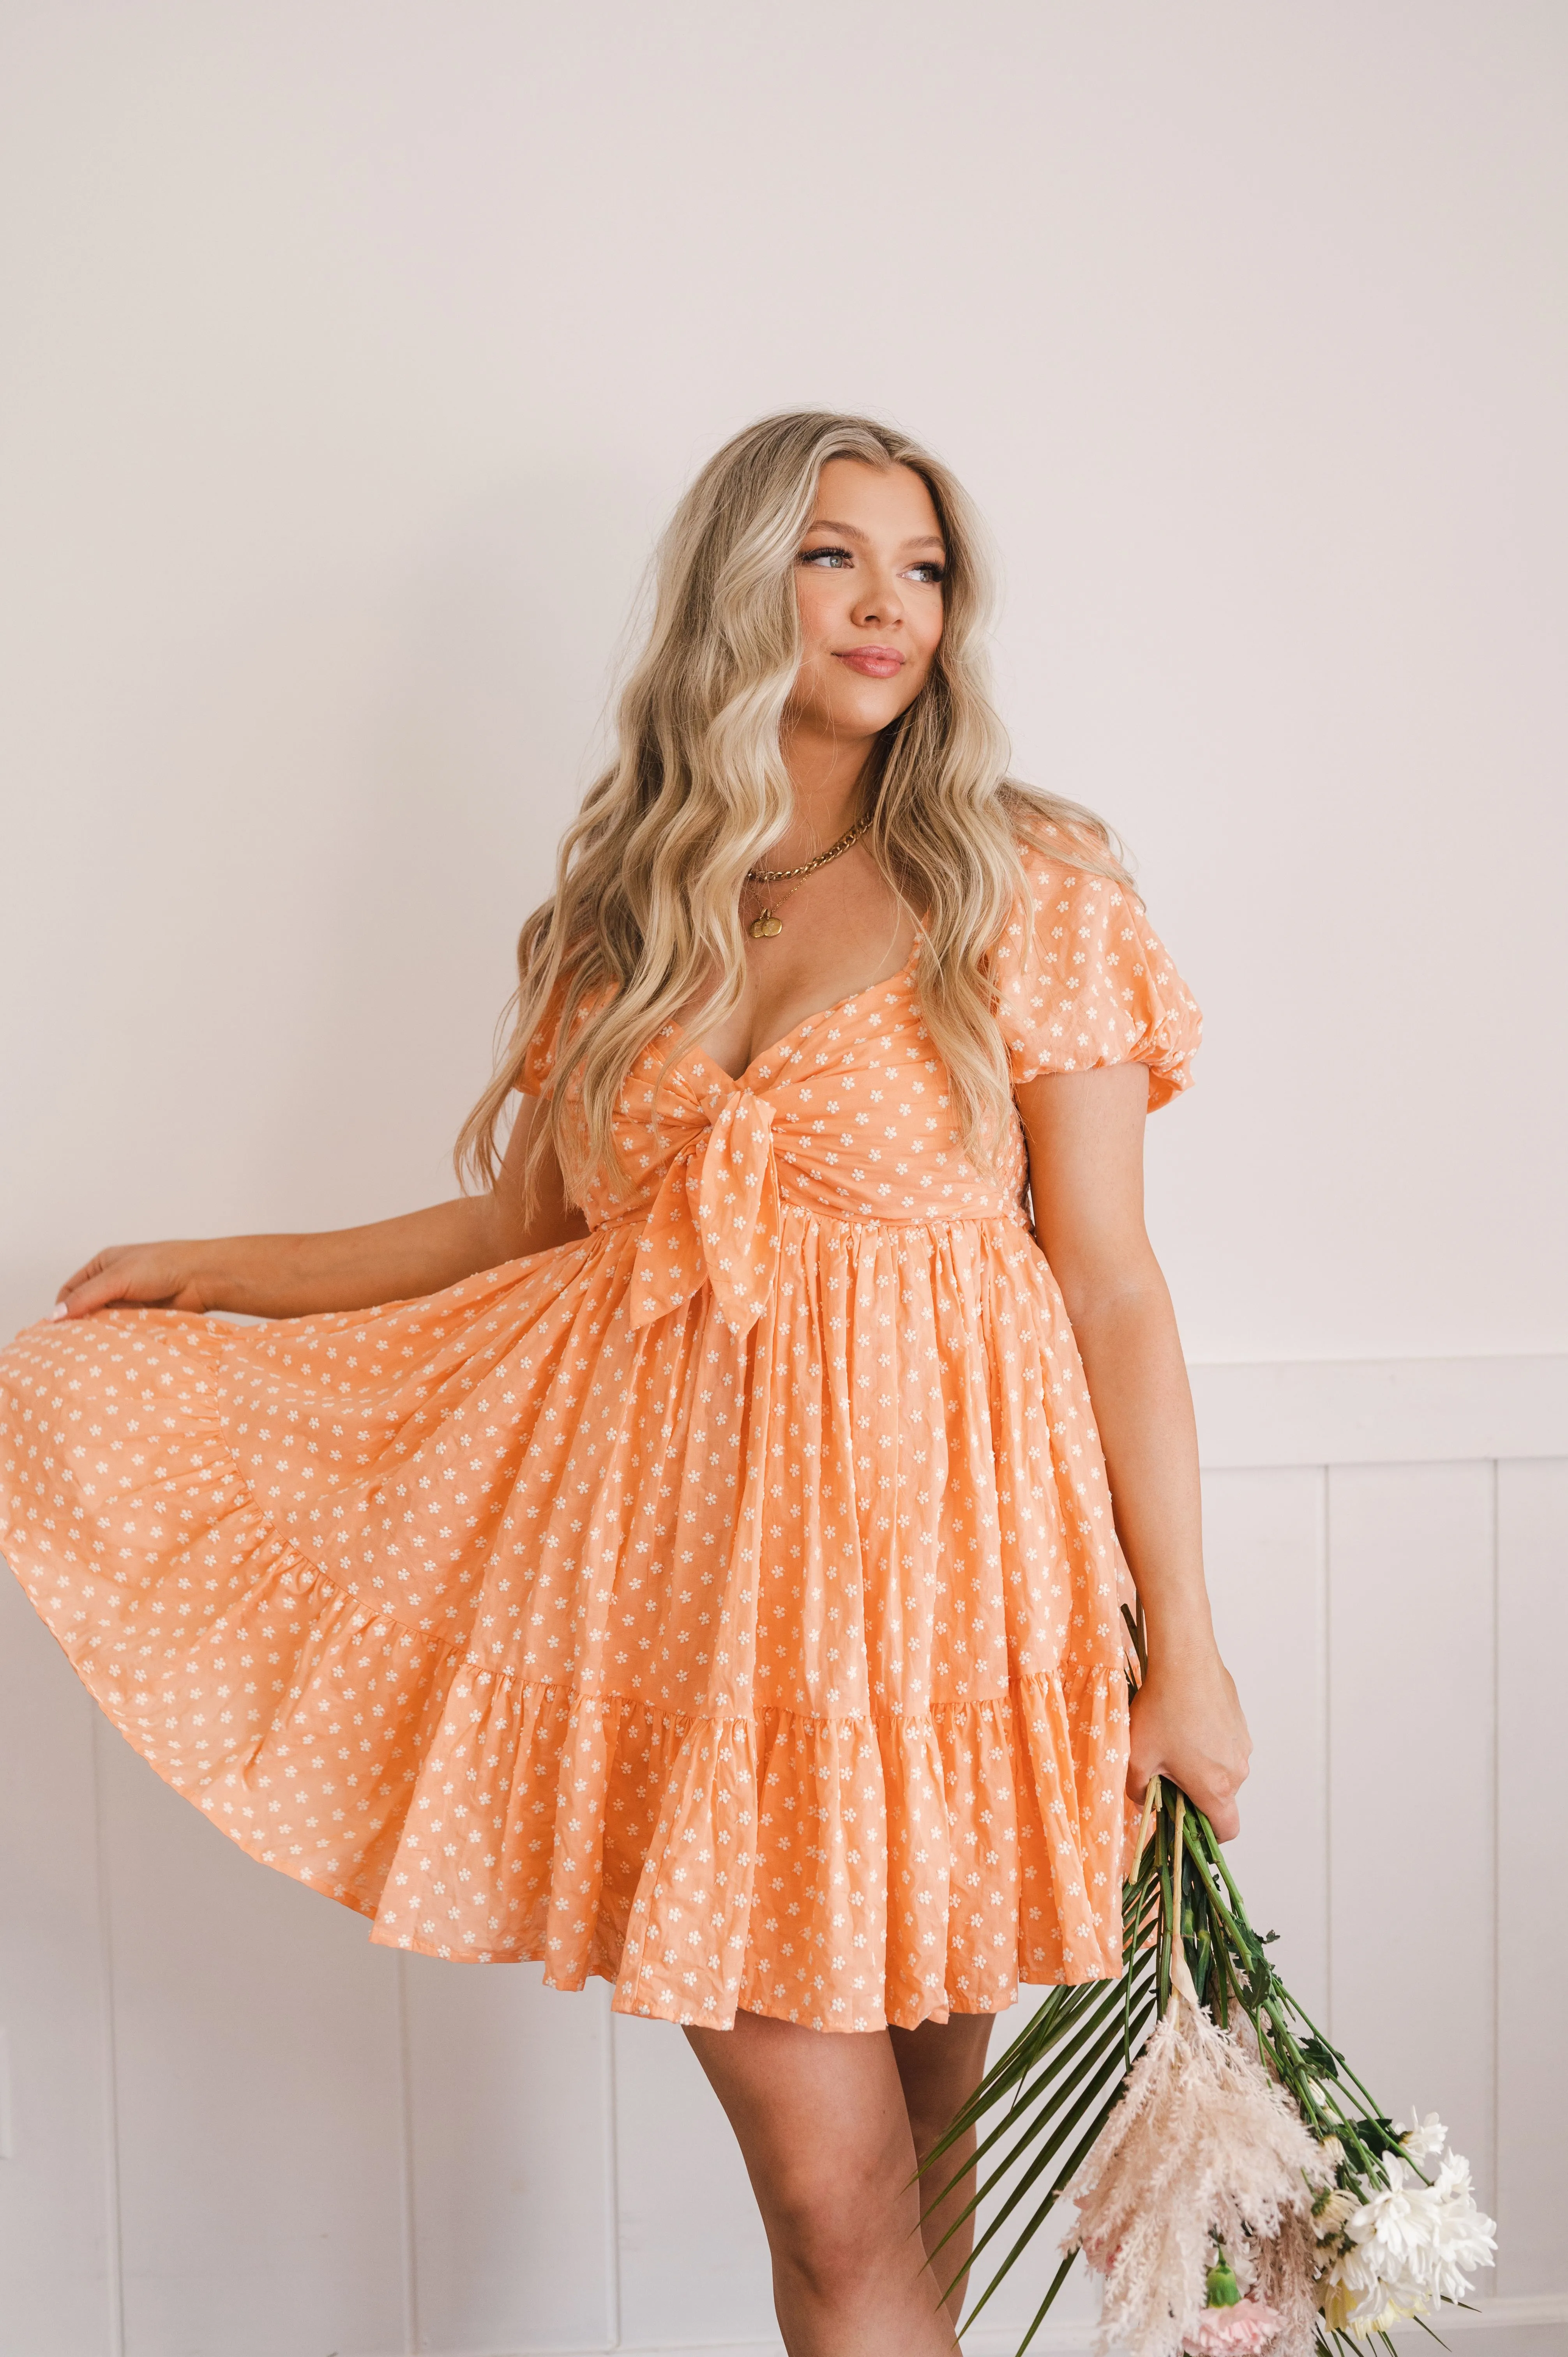 Woman in a peach polka dot dress holding flowers and posing with a twirl against a light background.